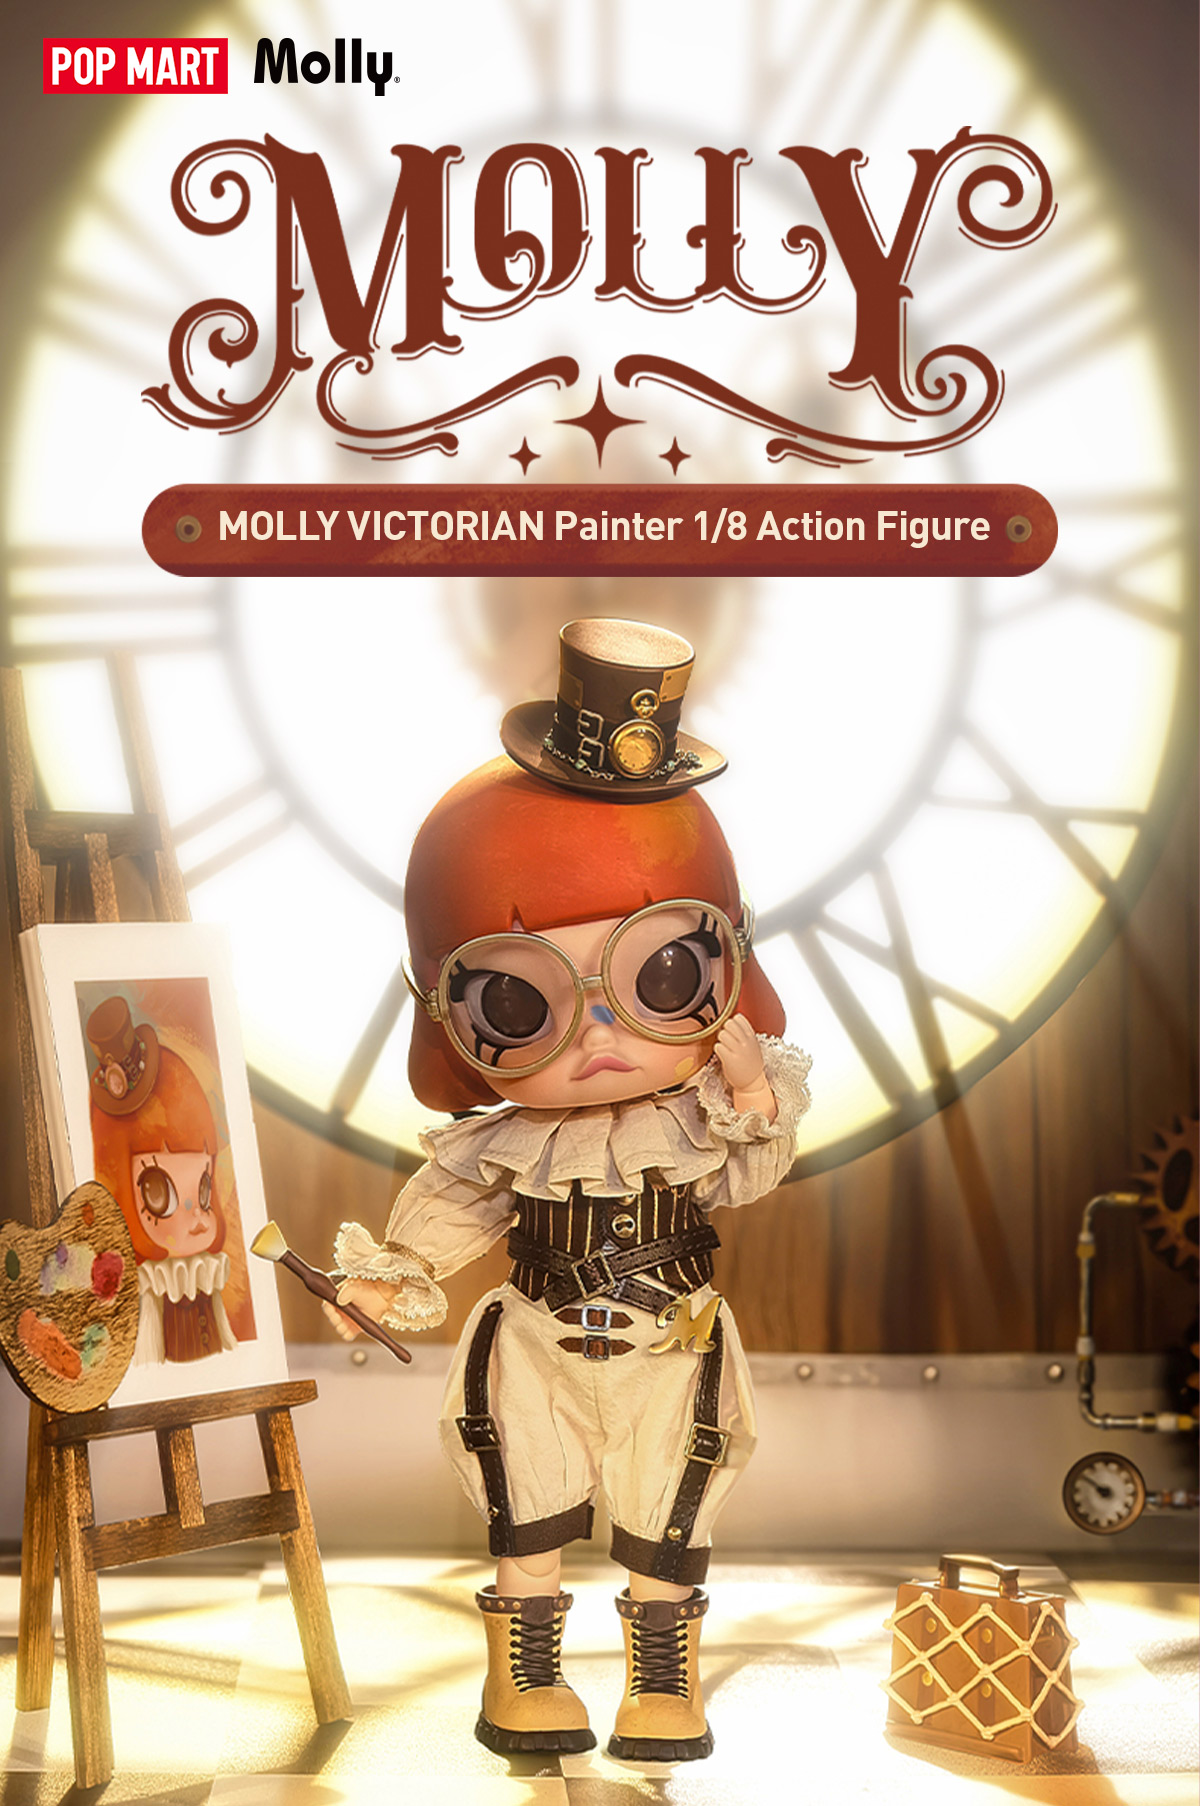 MOLLY Victorian Painter 1/8 Action Figure - POP MART (United States)